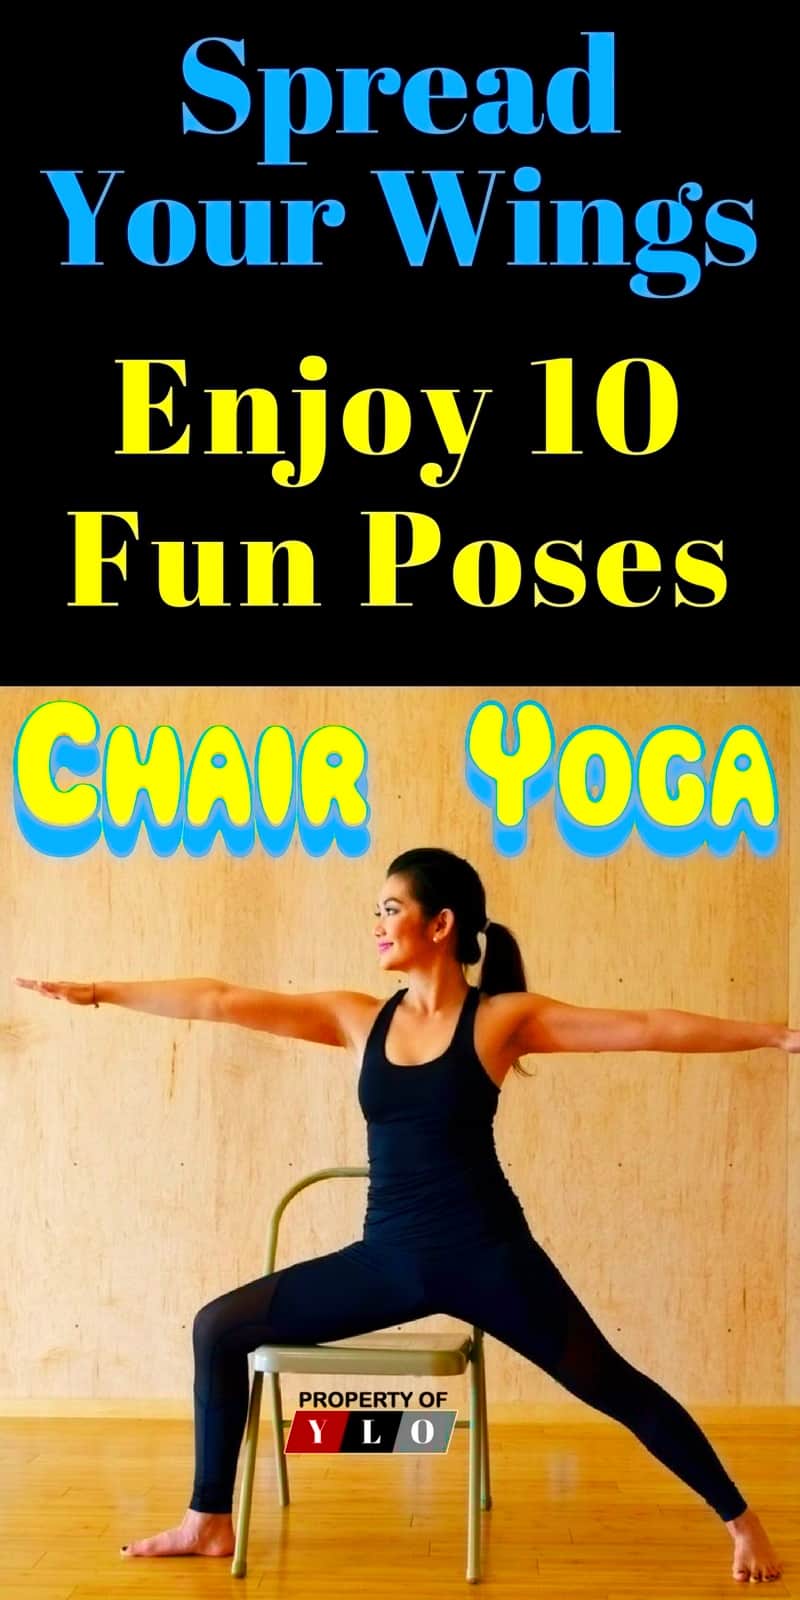 Chair Yoga Poses and Benefits – Your Lifestyle Options